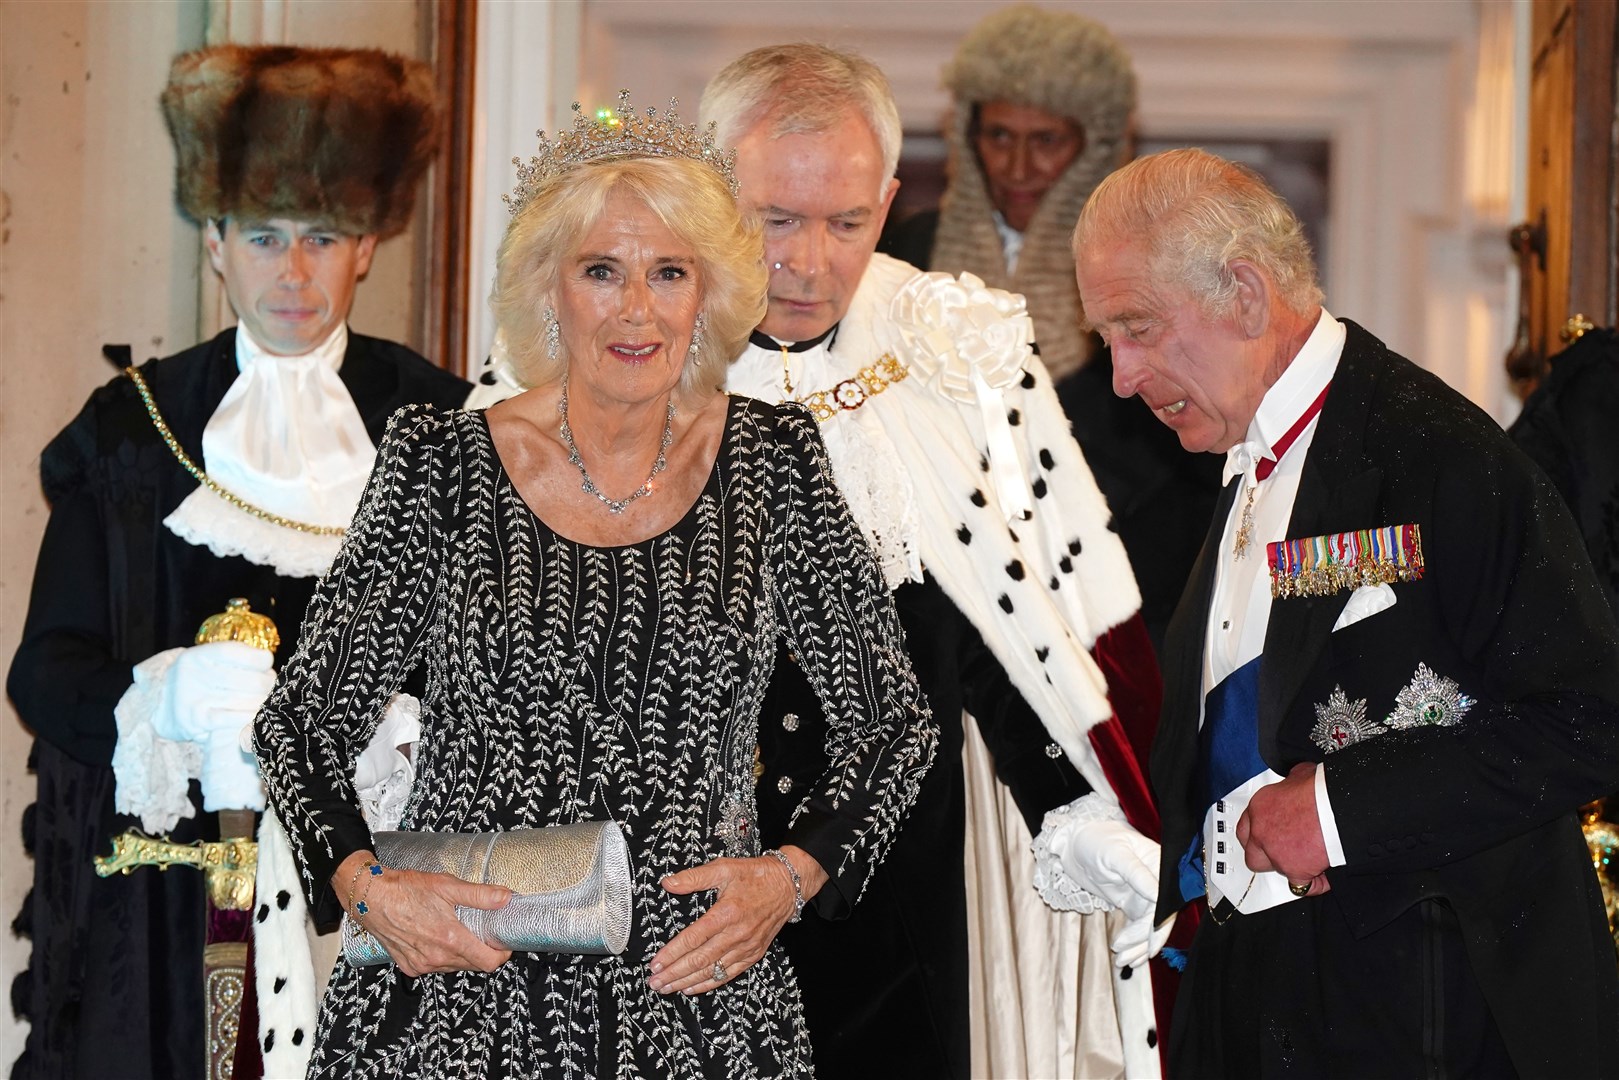 The King and Queen arrive at Mansion House (Aaron Chown/PA)